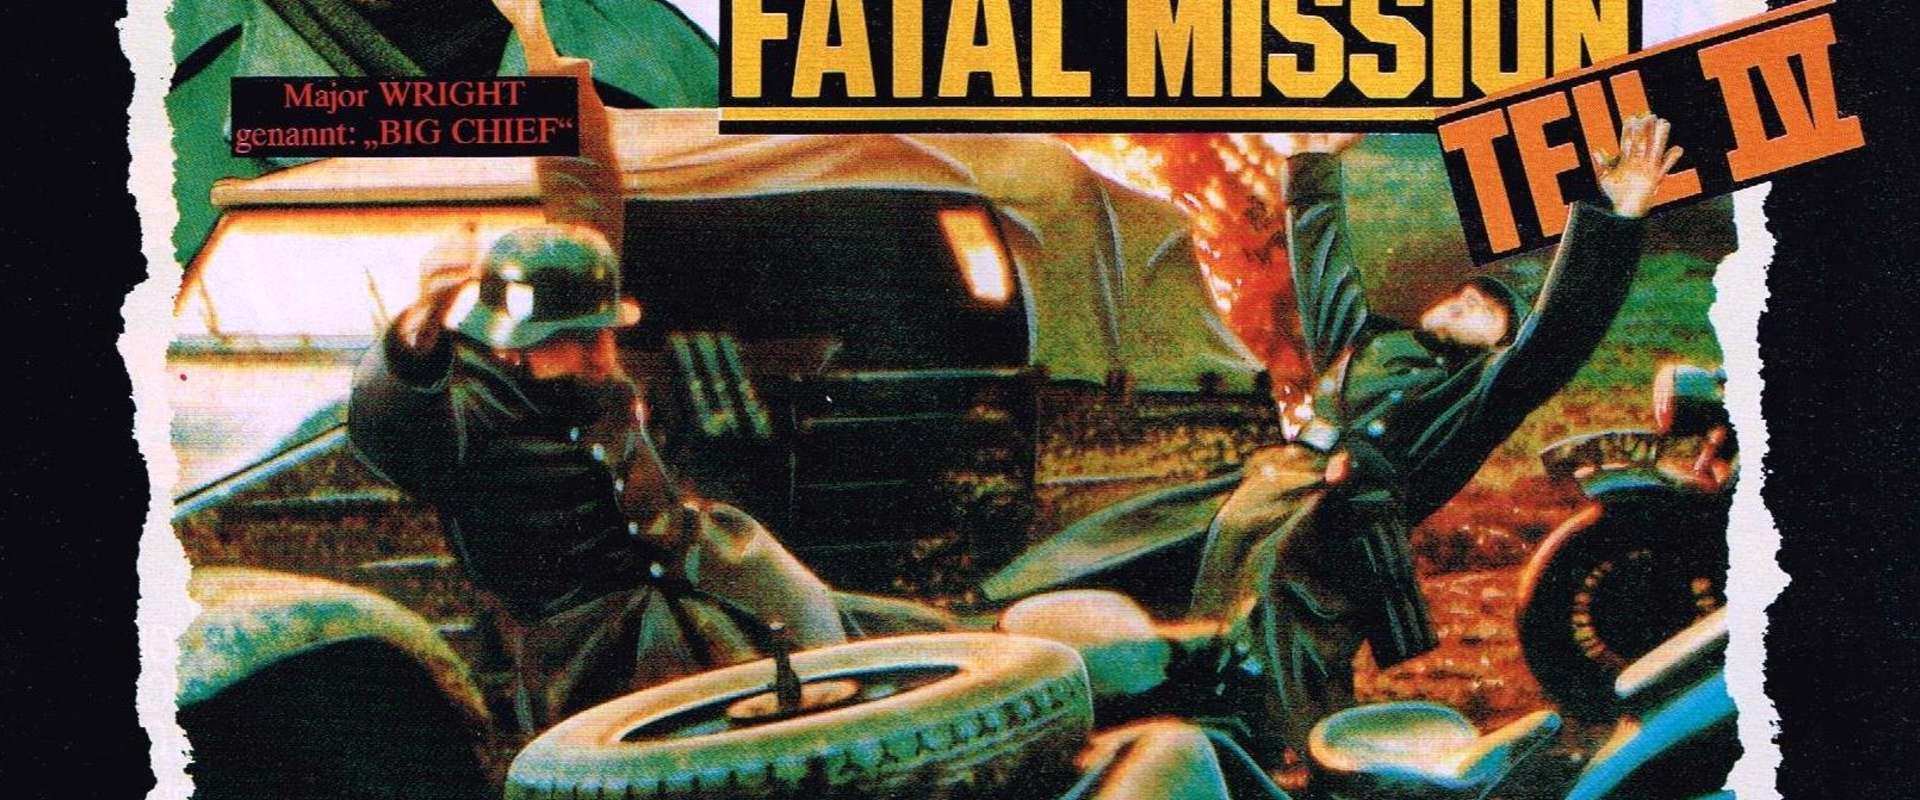 The Dirty Dozen: The Fatal Mission background 2